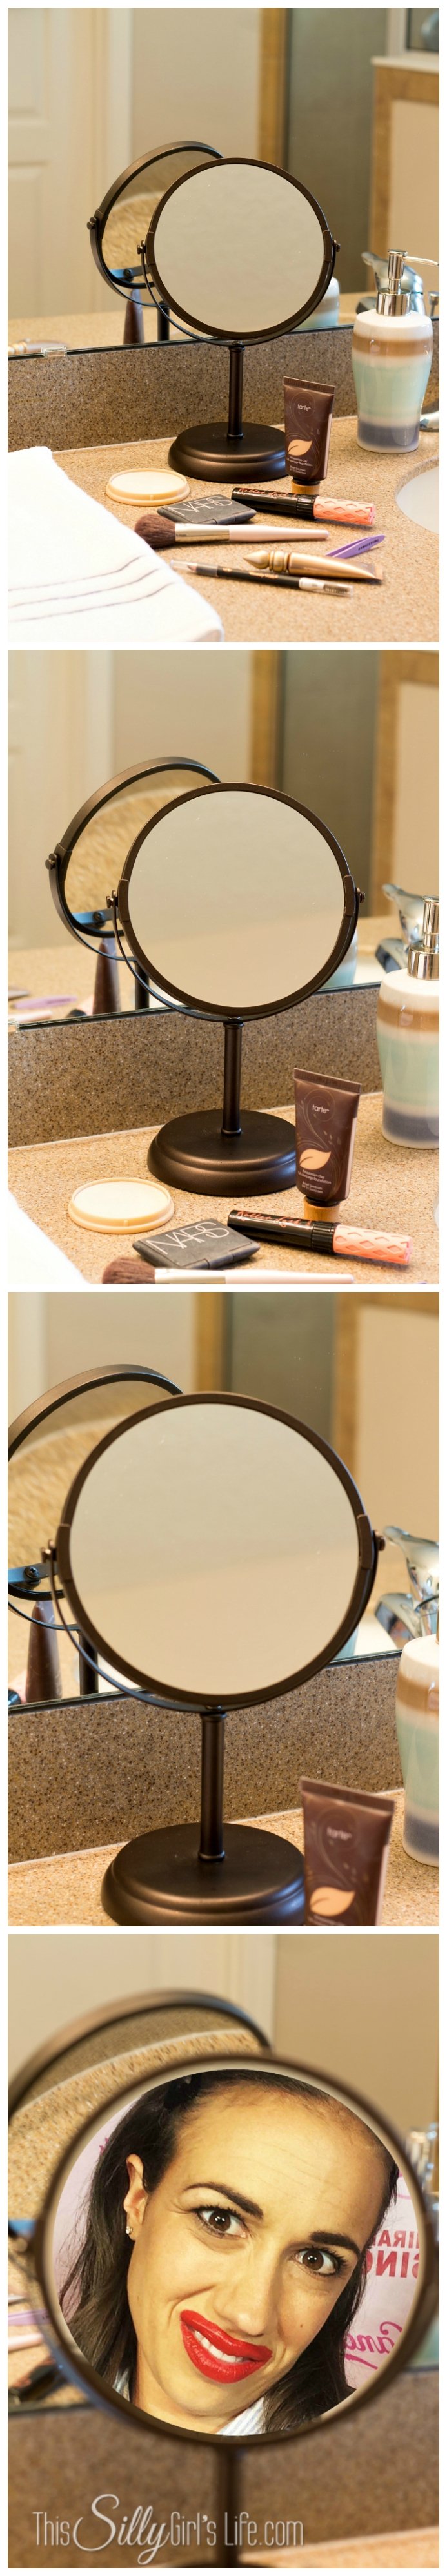 Bathroom Restyle with Target #stylereflush #ad